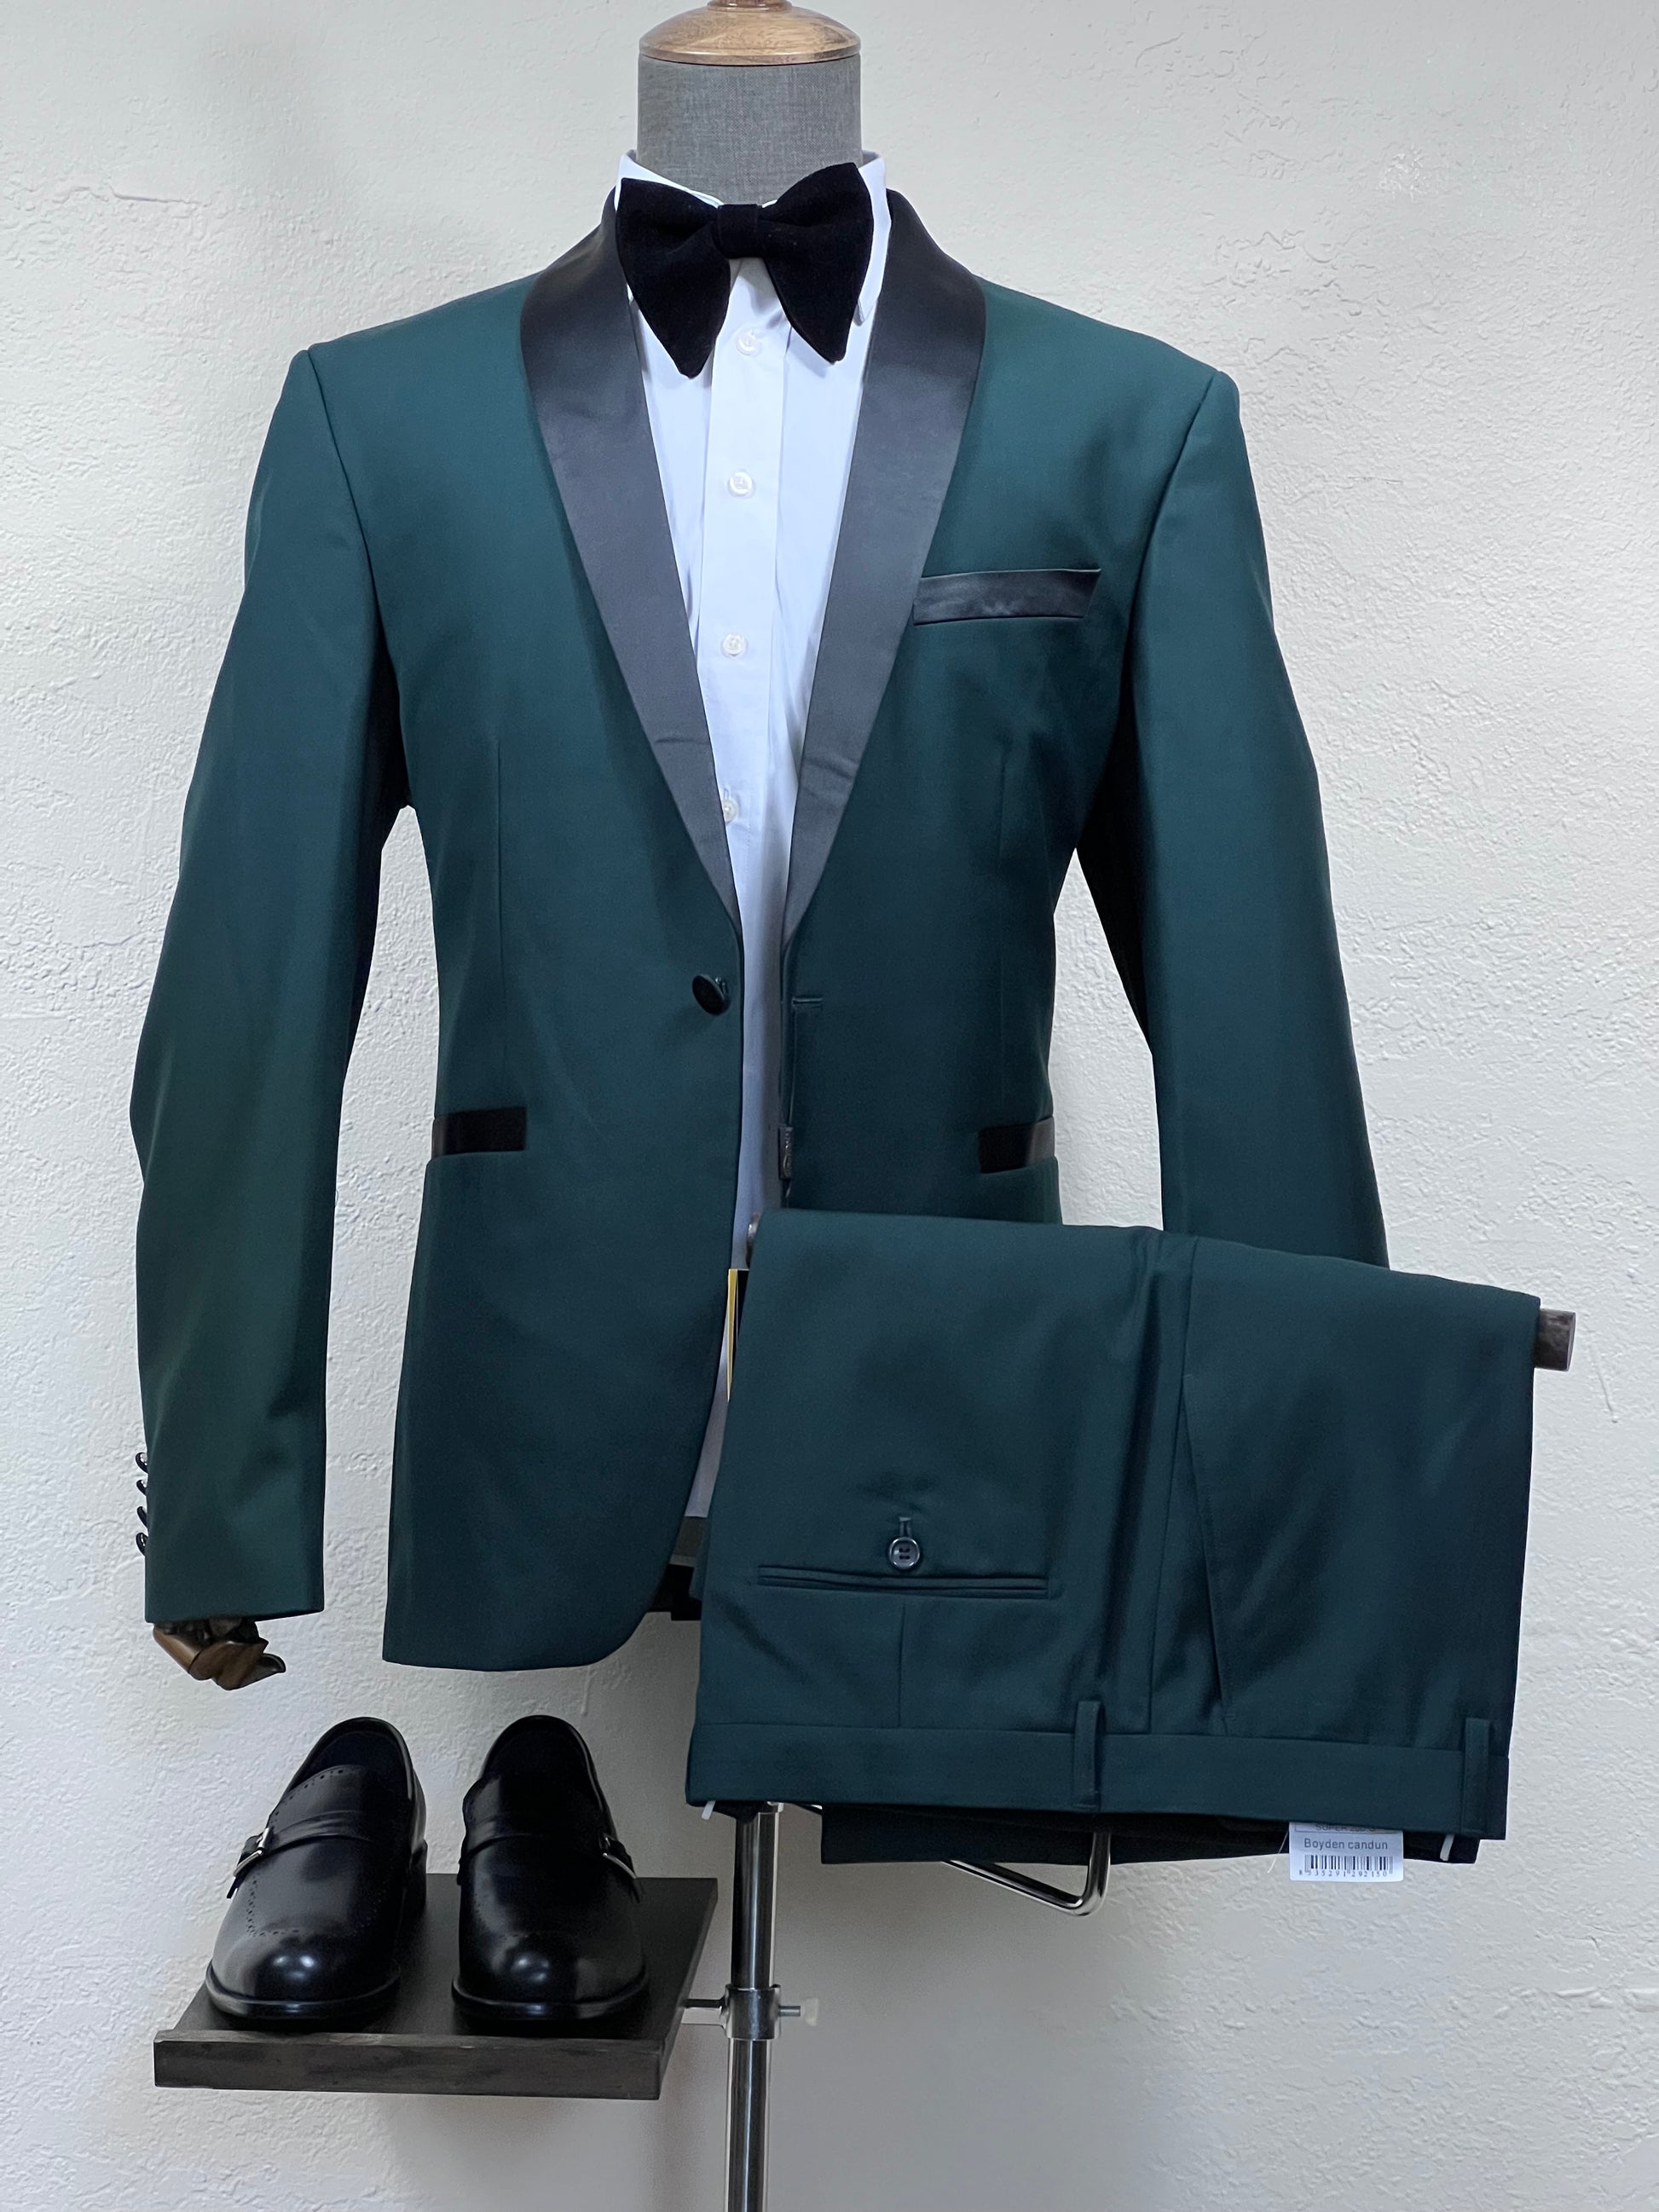 2-Piece ,1-Button Slim Fit Green Suit With Black Shawl Lapel